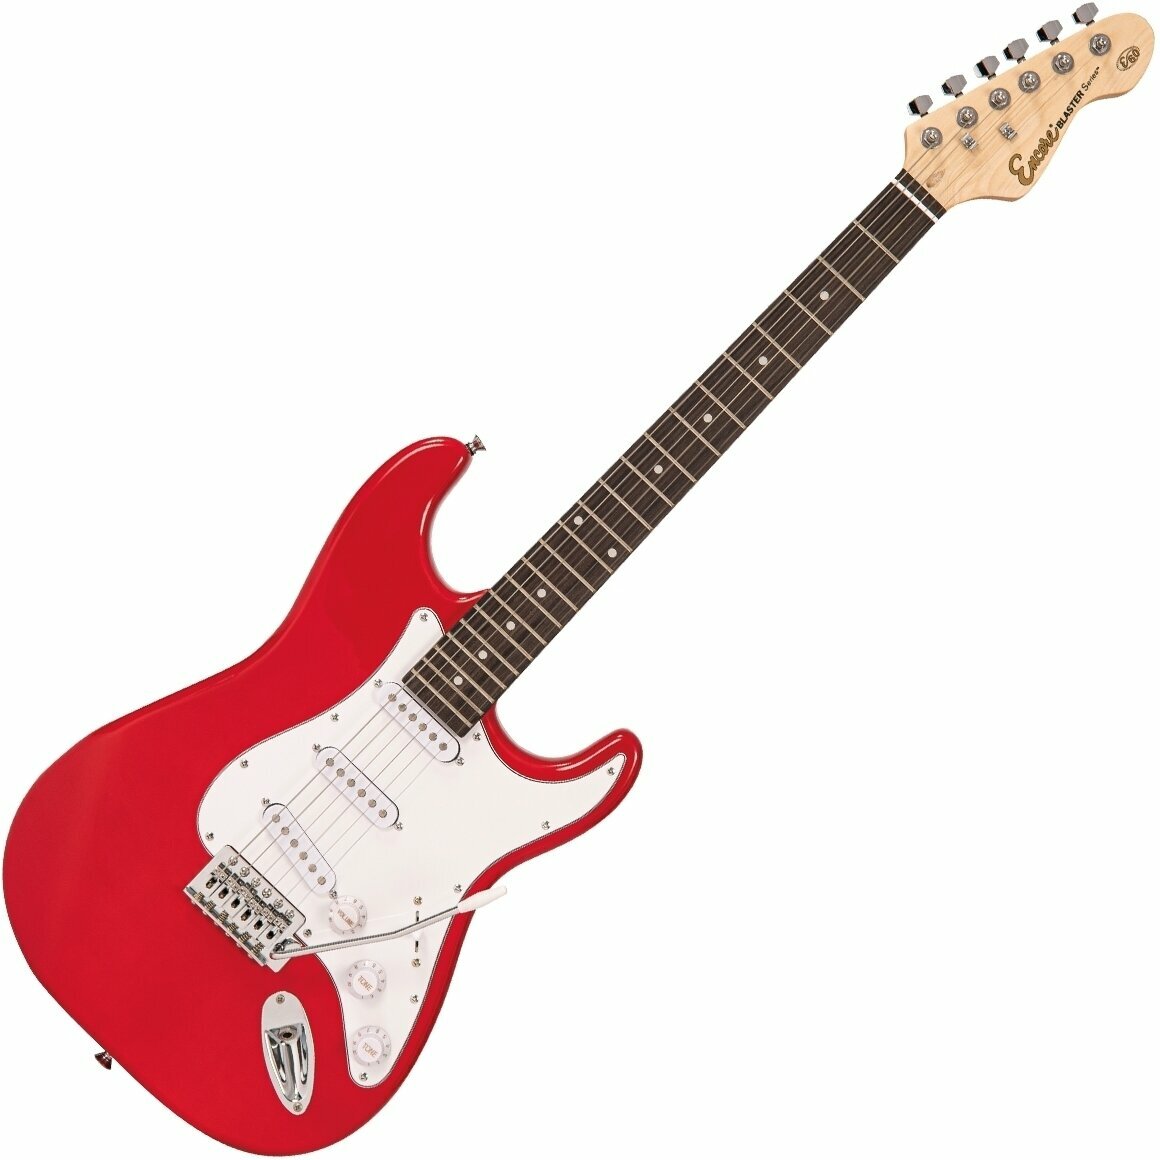 Electric guitar Encore E60 Blaster Gloss Red Gloss Red Finish